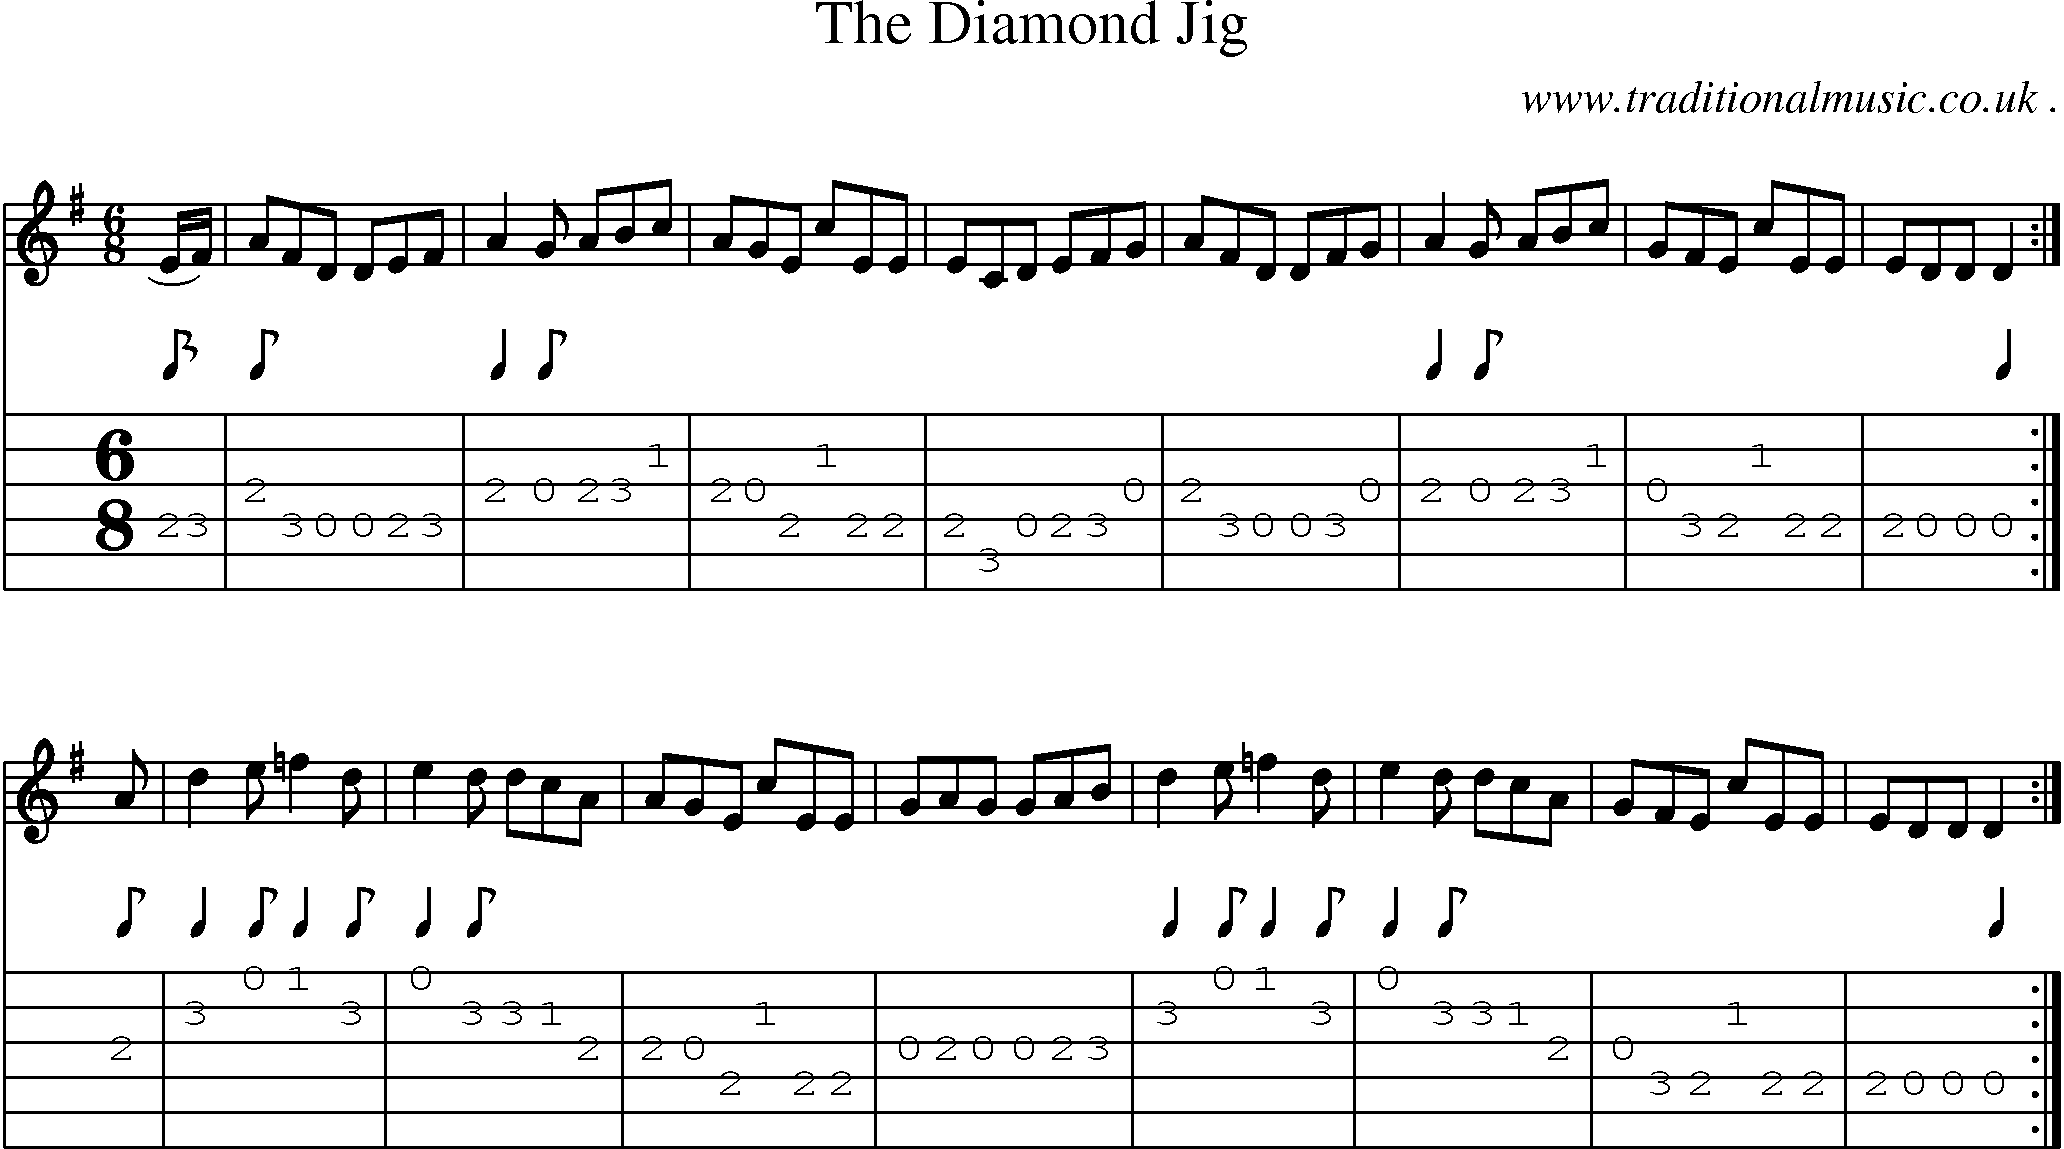 Sheet-Music and Guitar Tabs for The Diamond Jig